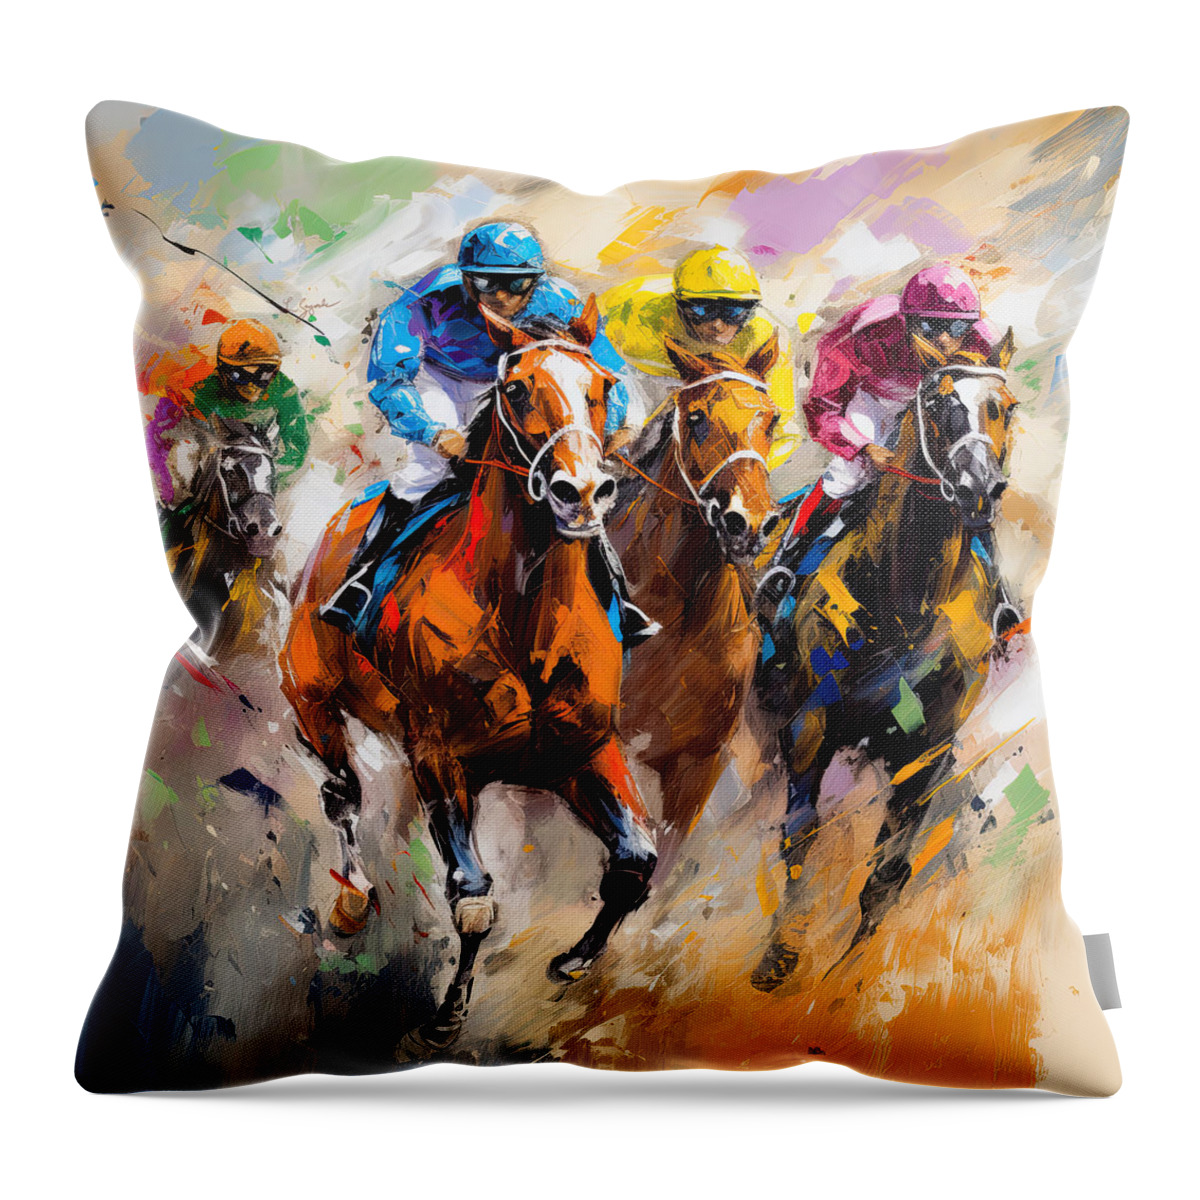 Horse Racing Throw Pillow featuring the painting A Battle of Strength by Lourry Legarde